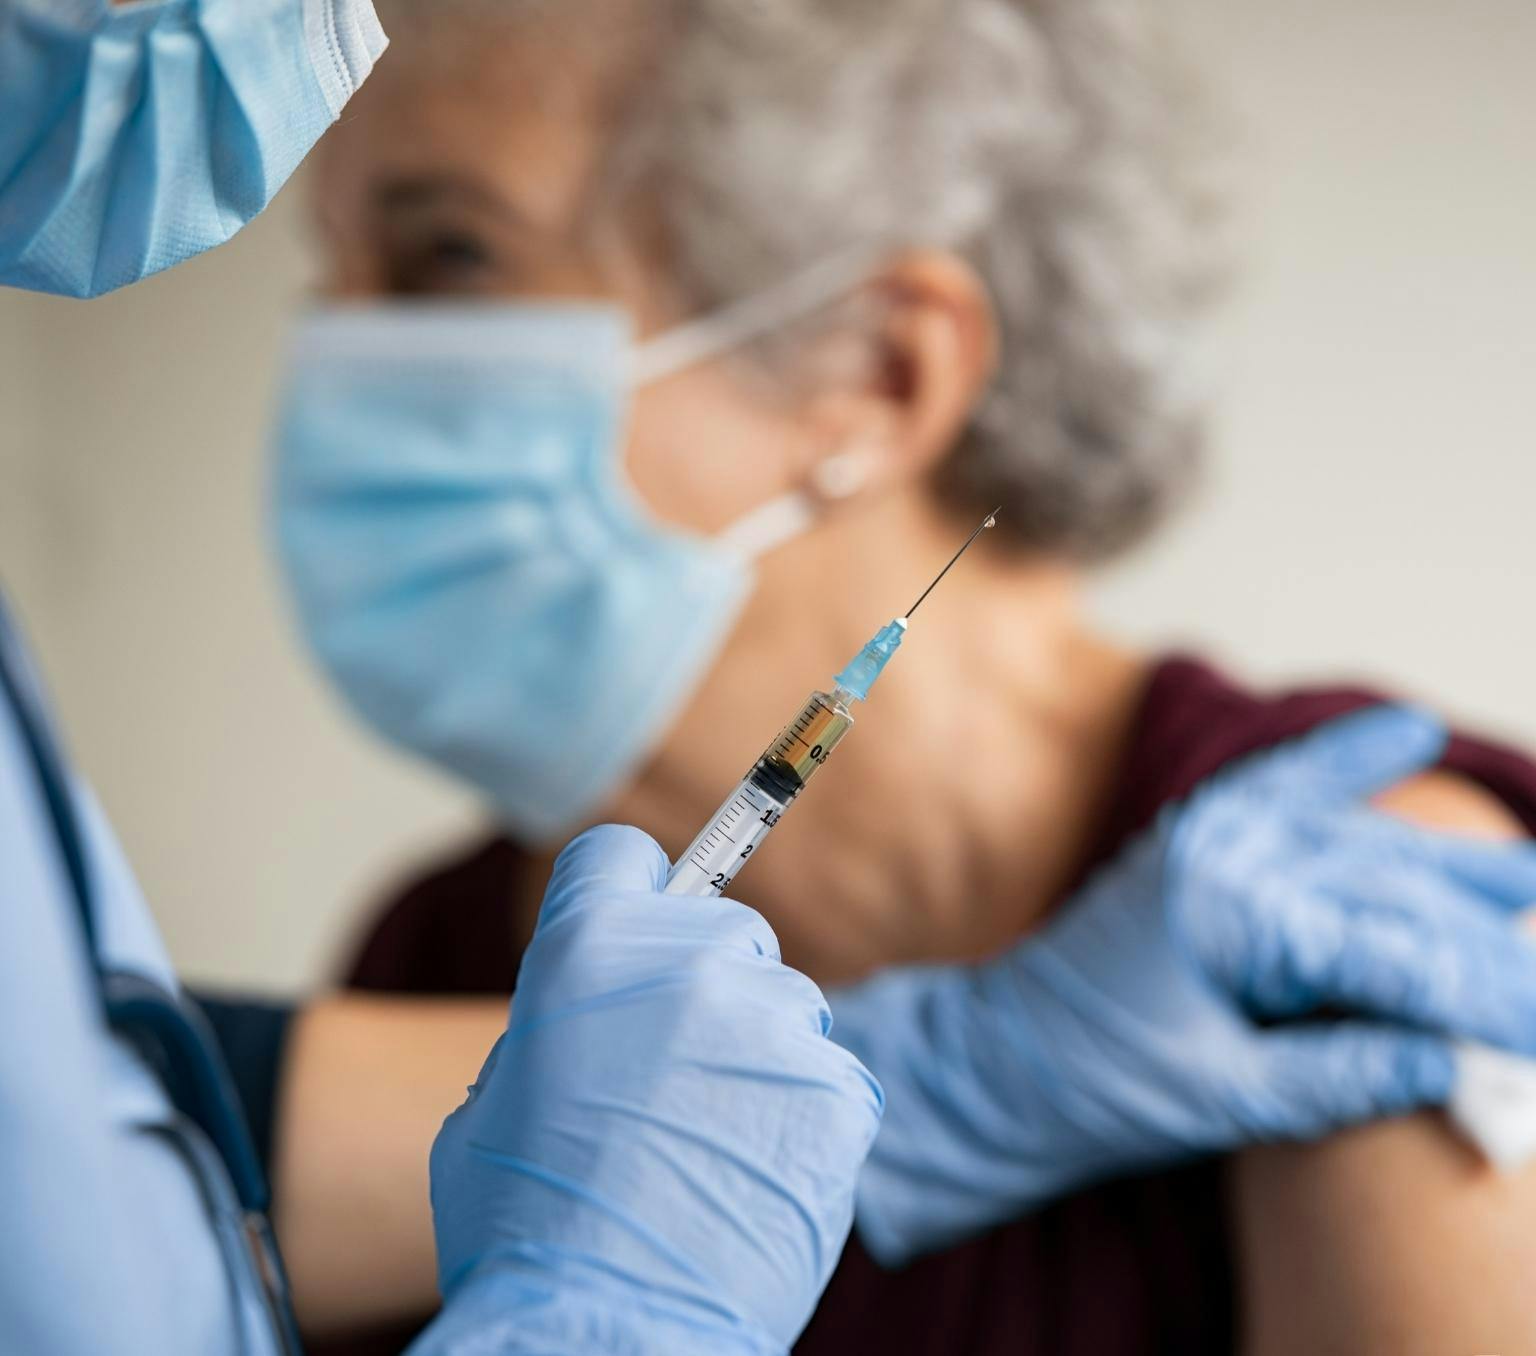 A person wearing blue gloves holds a needle in their right hand. Their left hand touches the bare arm of a woman, who is blurred in the background.